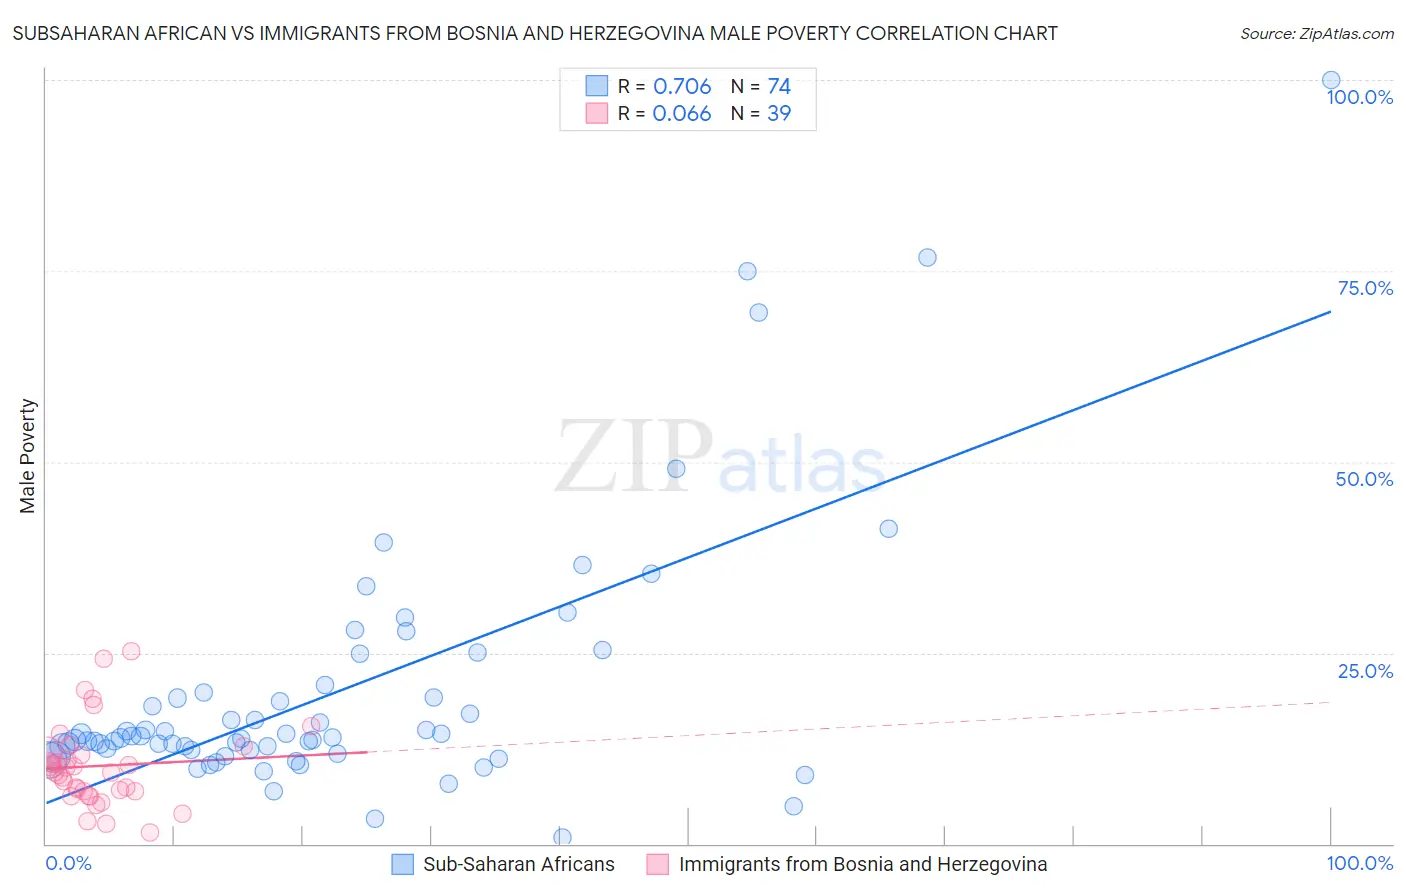 Subsaharan African vs Immigrants from Bosnia and Herzegovina Male Poverty